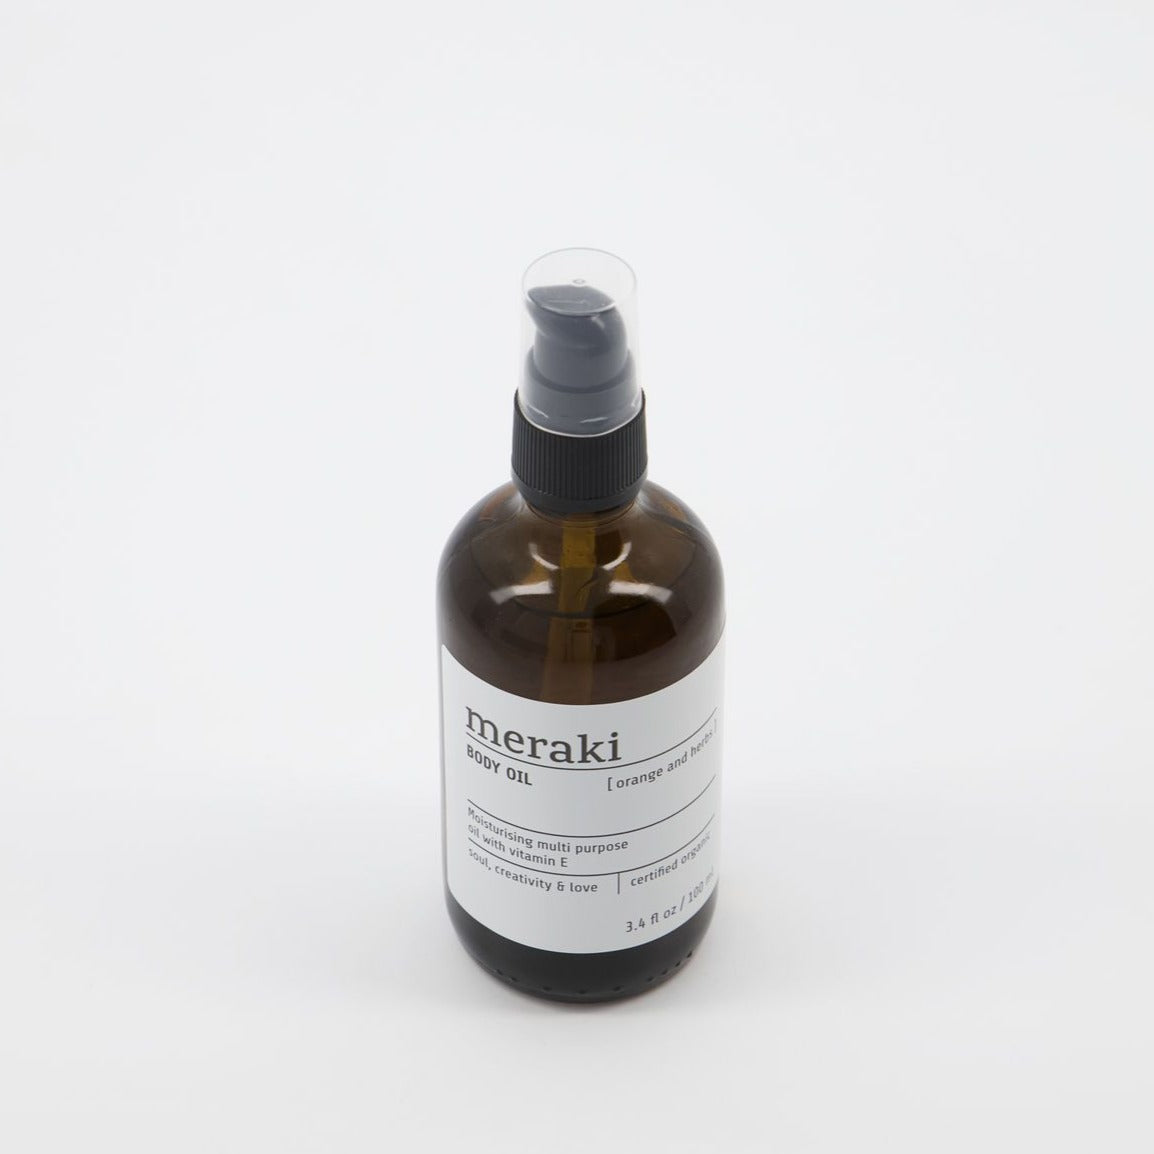 Give your body extra love with this Meraki certified organic oil. Extremely nourishing and contains organic sesame, rapeseed and olive oils that moisturize, nourish and soften the skin. Use this oil as a body moisturizer, massage oil, makeup remover, in dry areas of the skin or at the ends of the hair. The possibilities are endless. If the face is too dry, add it to the face cream as well. 